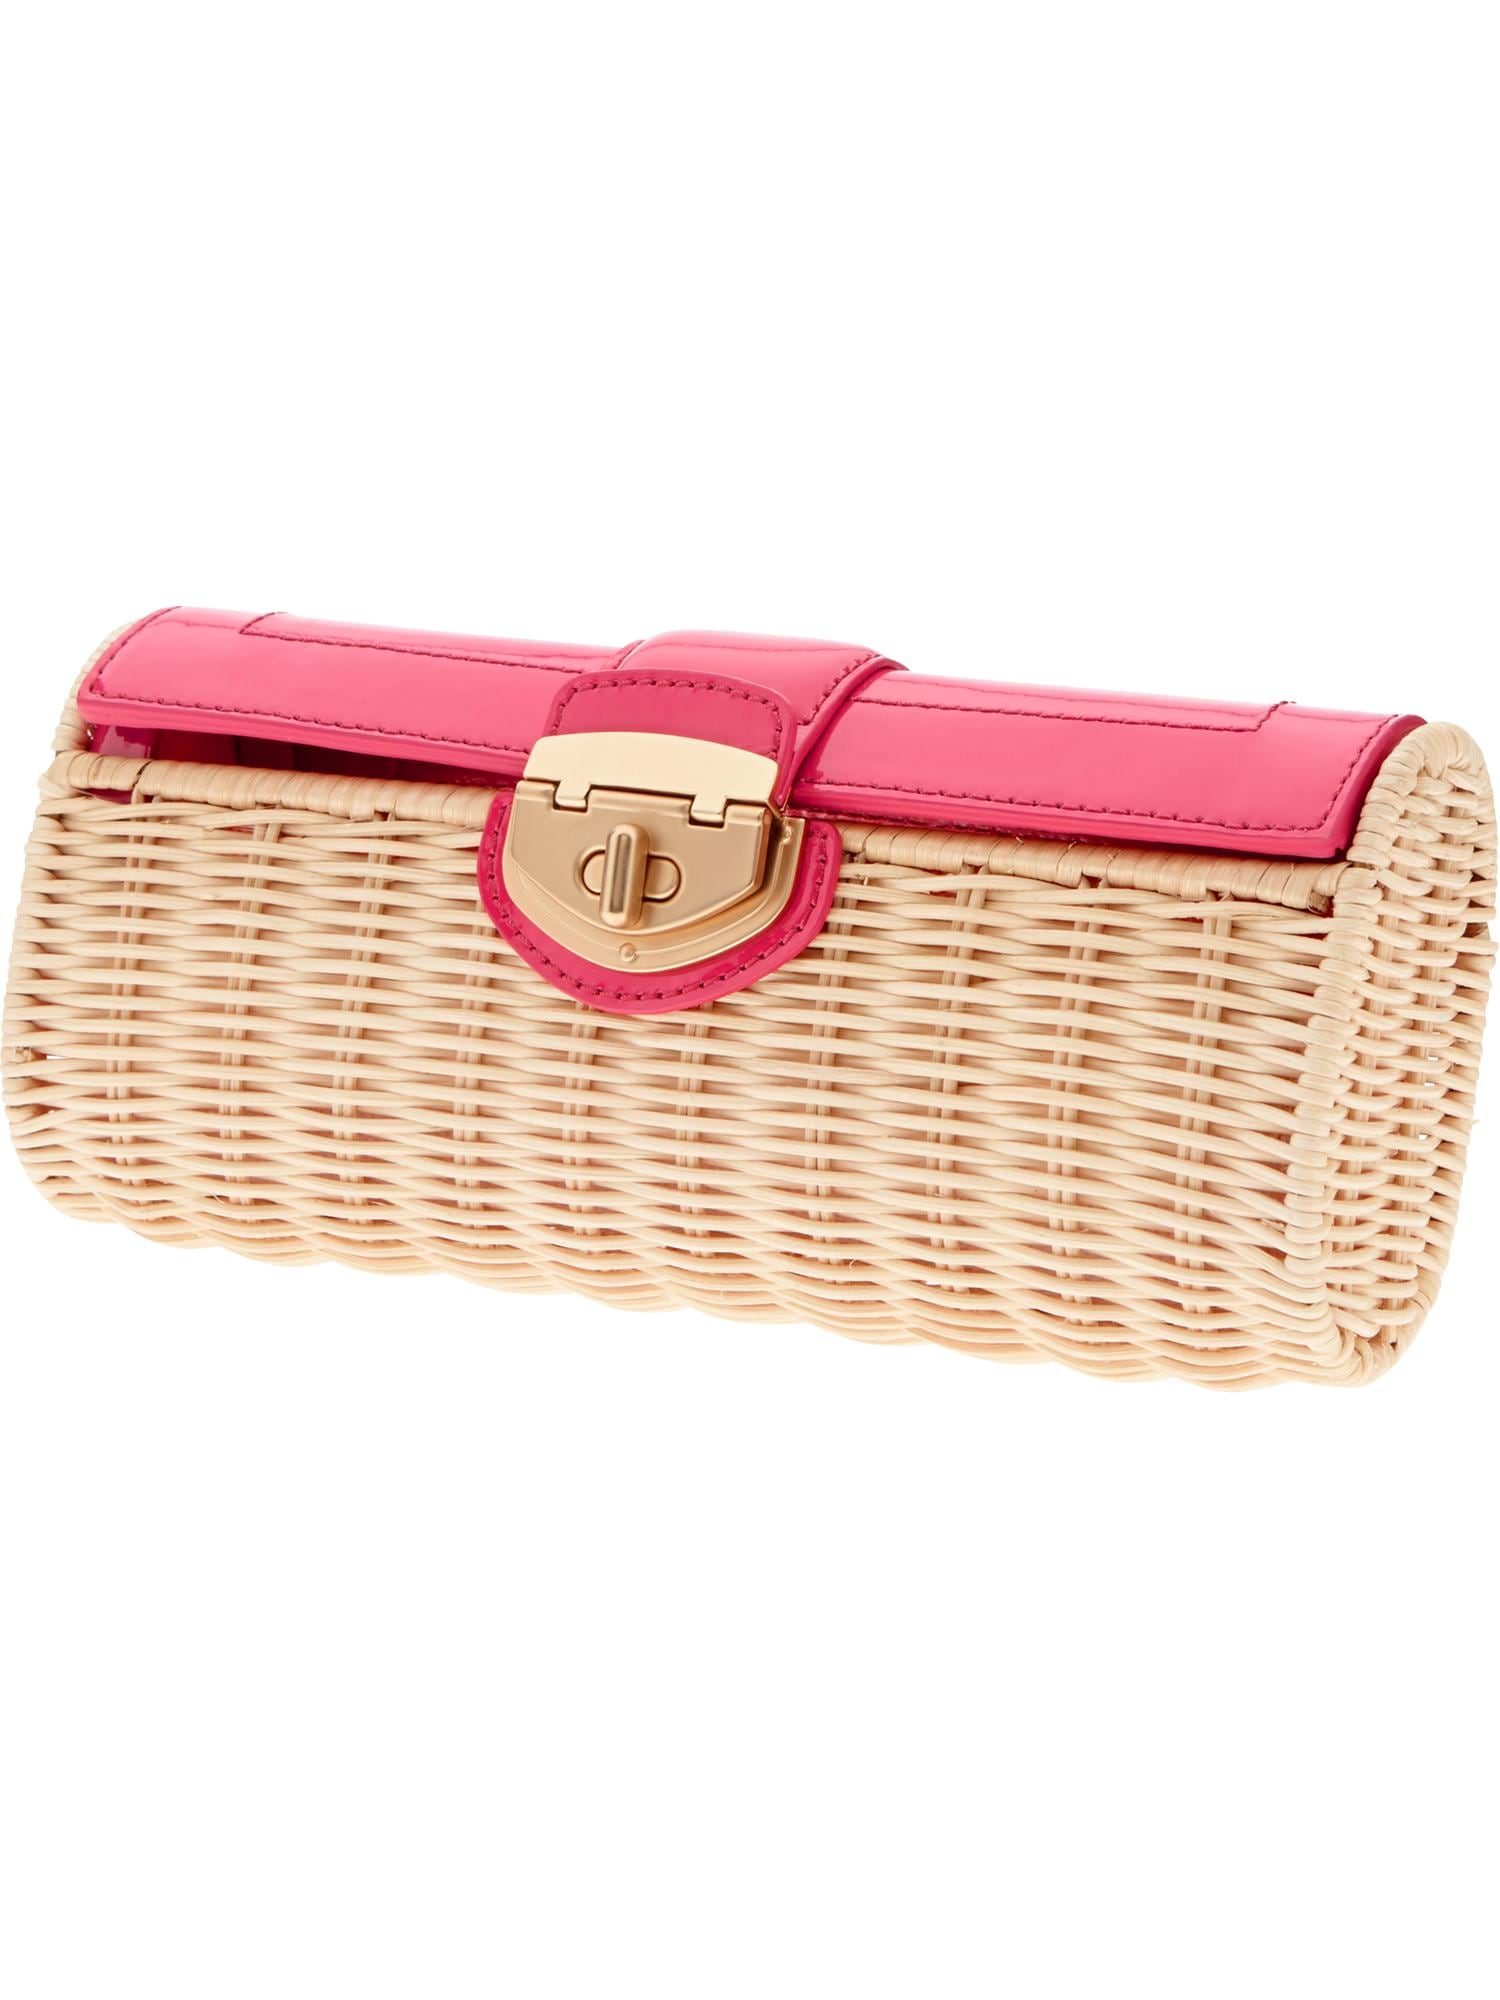 Milly Collection Patent Wicker Clutch